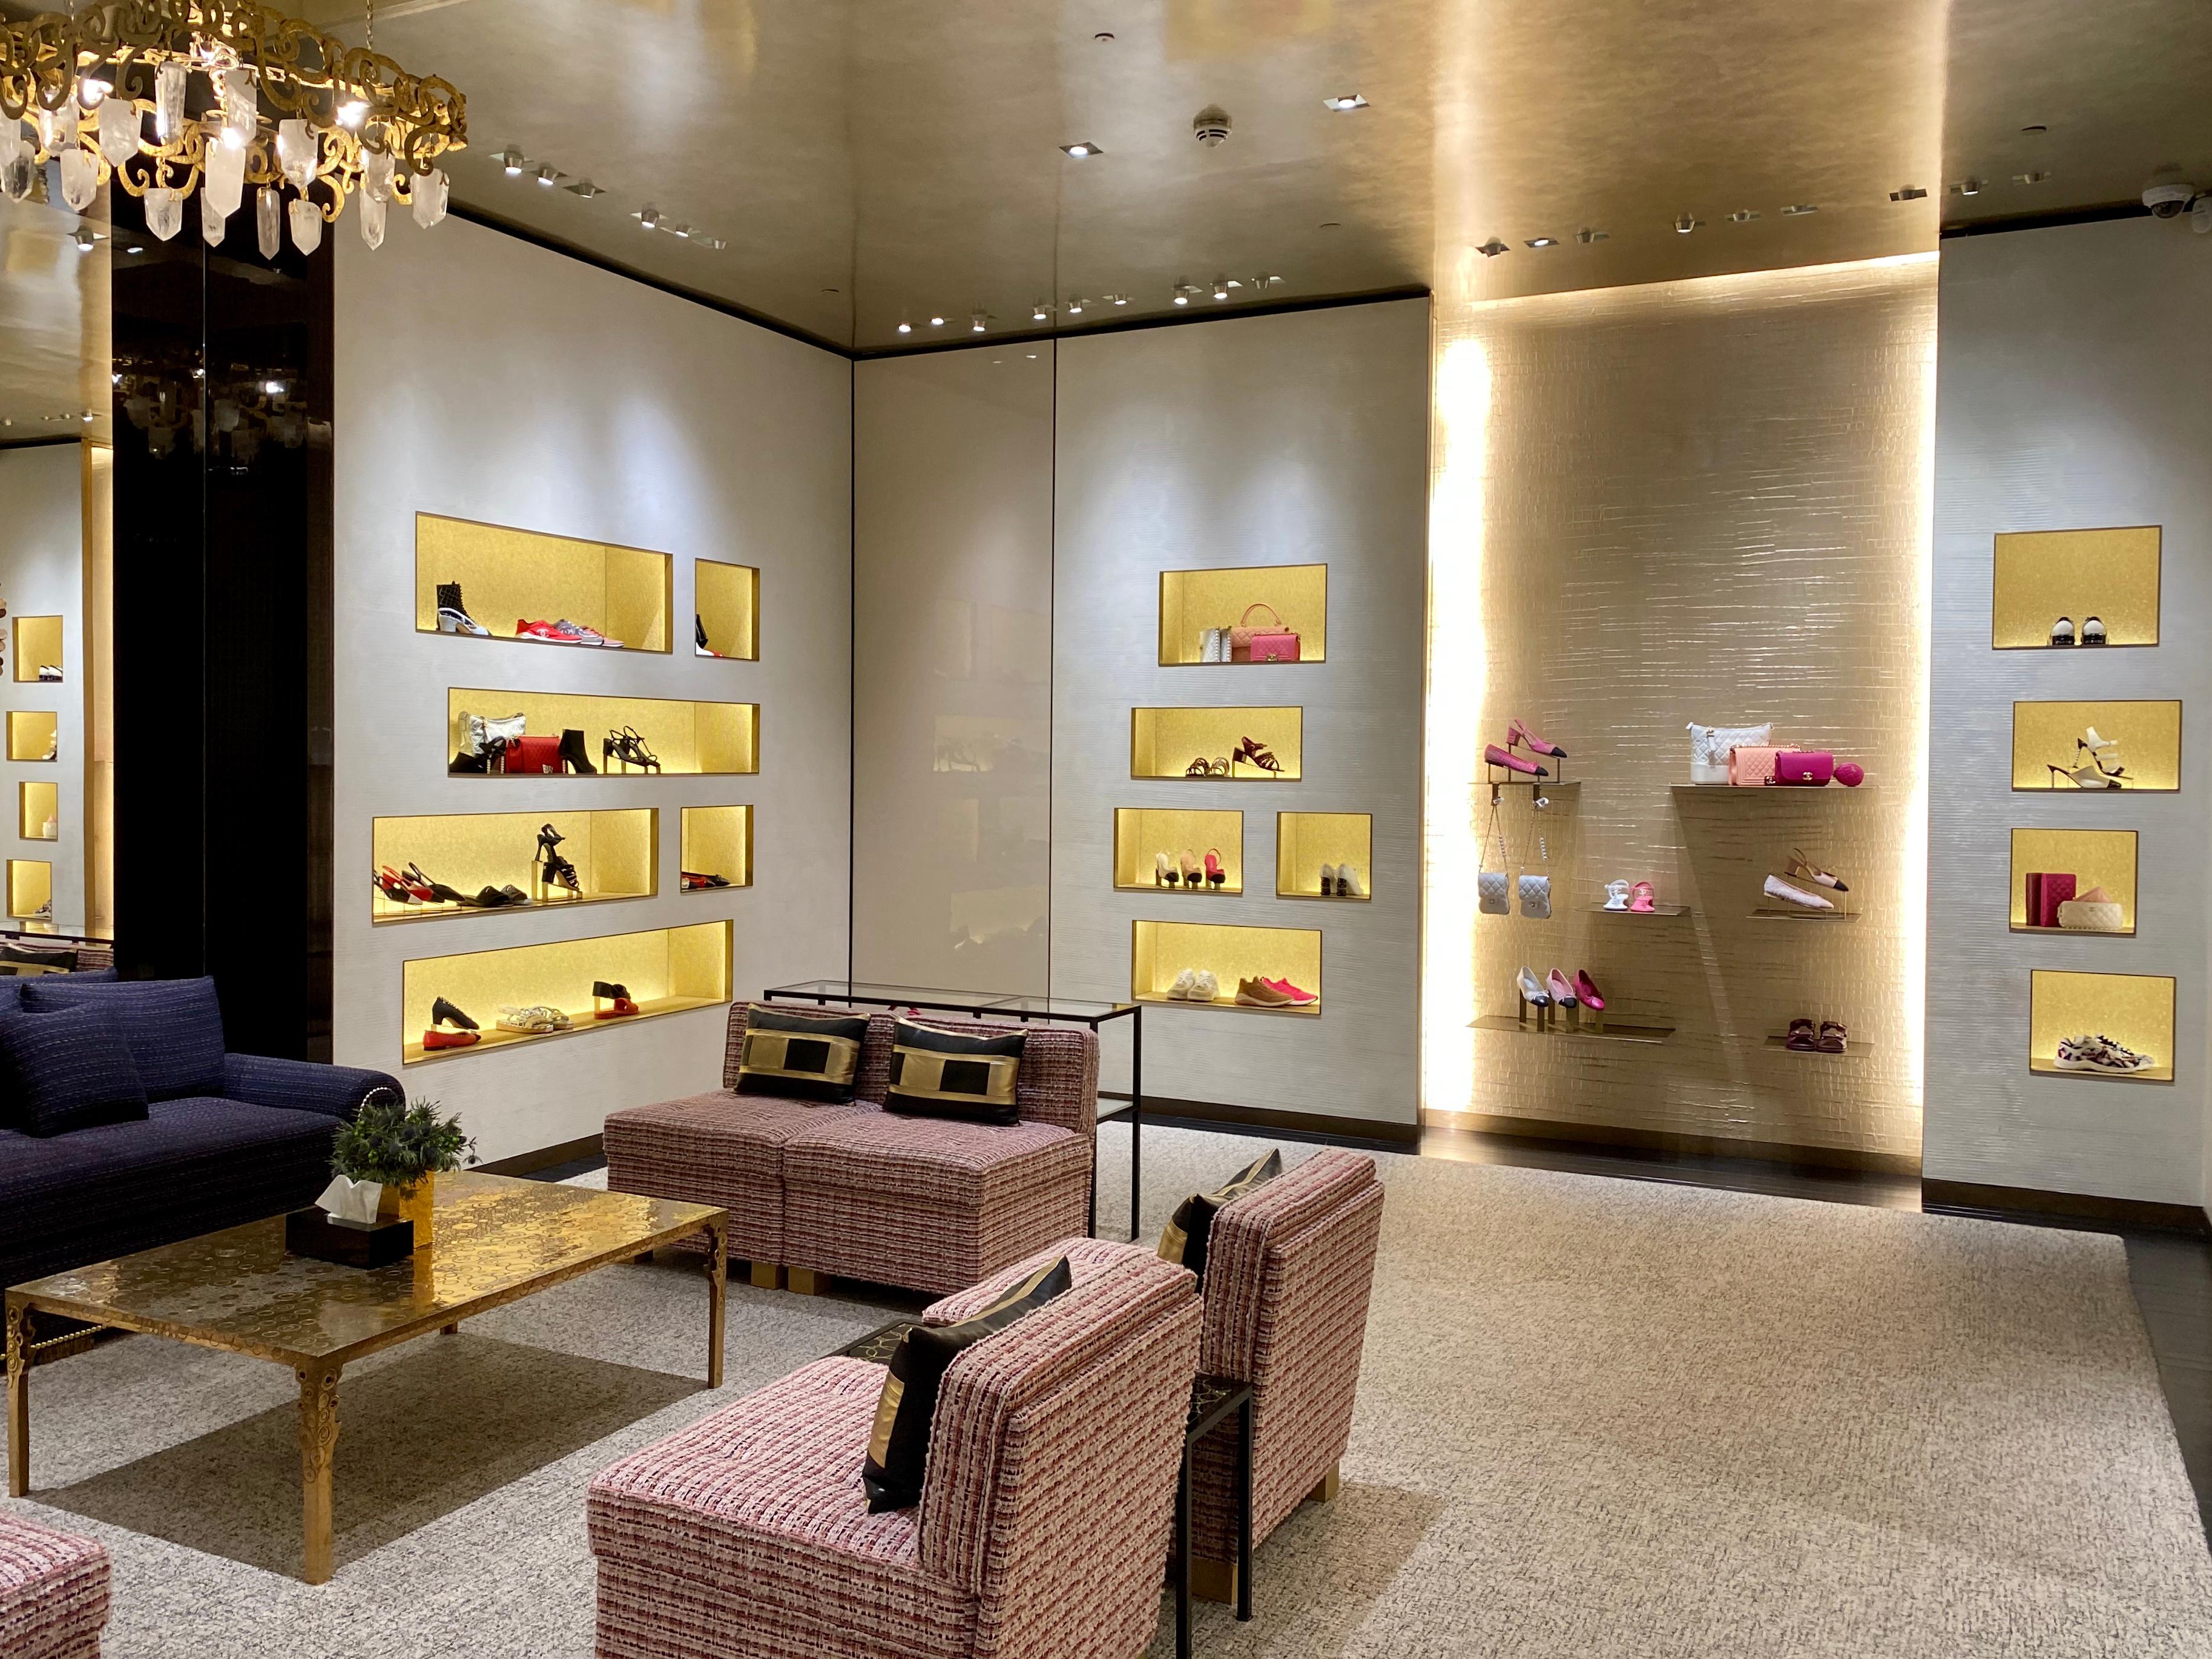 CHANEL - CLOTHING AND ACCESSORIES, CLOCKS AND WATCHES (RETAIL AND REPAIRS),  JEWELRY, JEWELRY AND WATCHMAKER'S SHOPS (RETAIL), PERFUME SHOPS (RETAIL),  CLOTHING ACCESSORIES (RETAIL), Dubai - Chanel in Dubai - Sheikh Zayed Road -